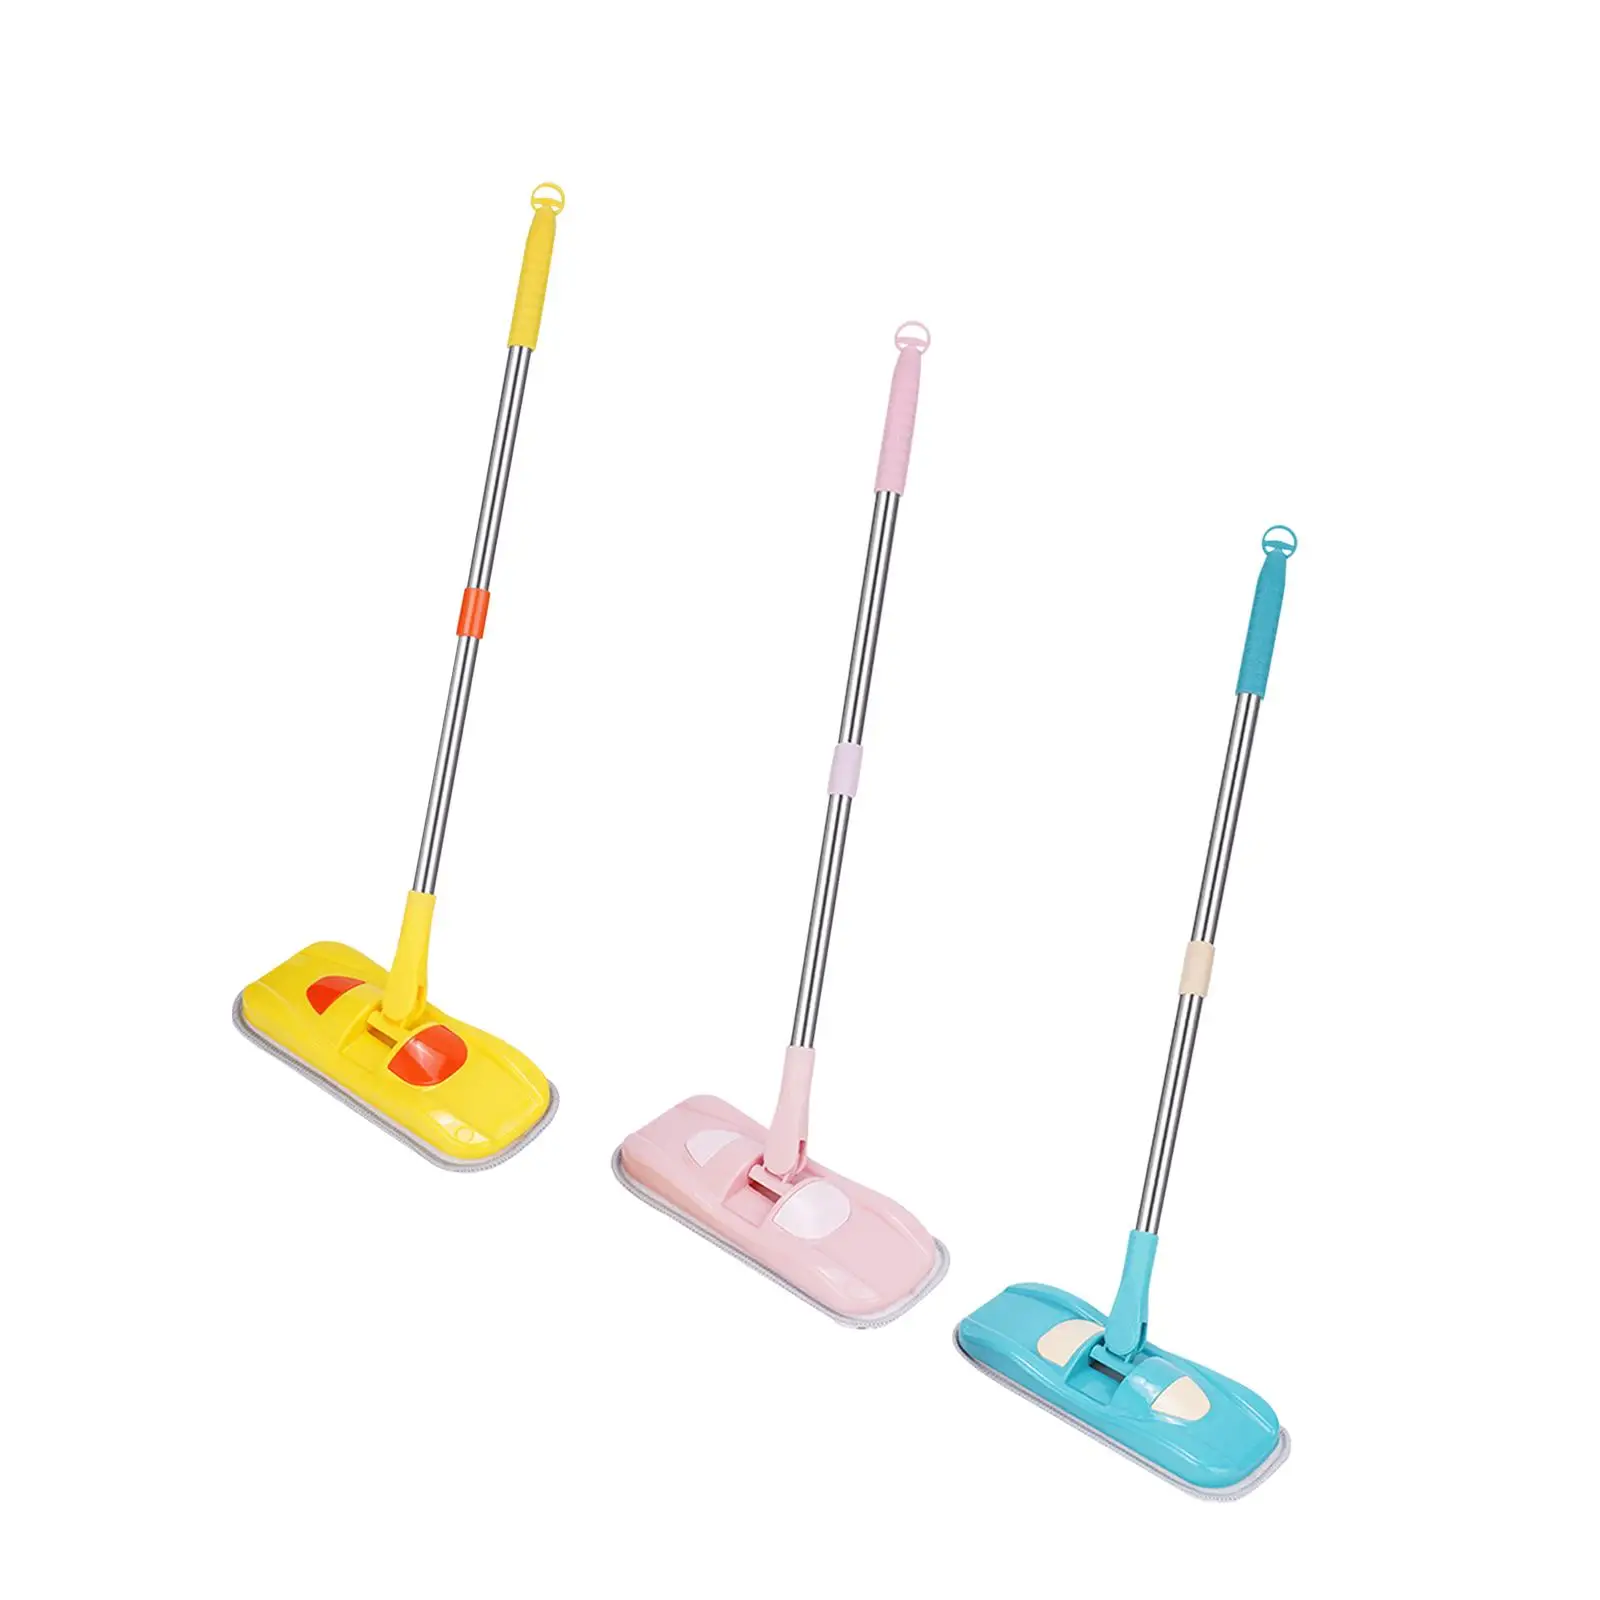 Little Housekeeping Helper Tool Playhouse Toy Early Learning Educational Durable Material Mini Kids Mop for Preschool Boys Girls